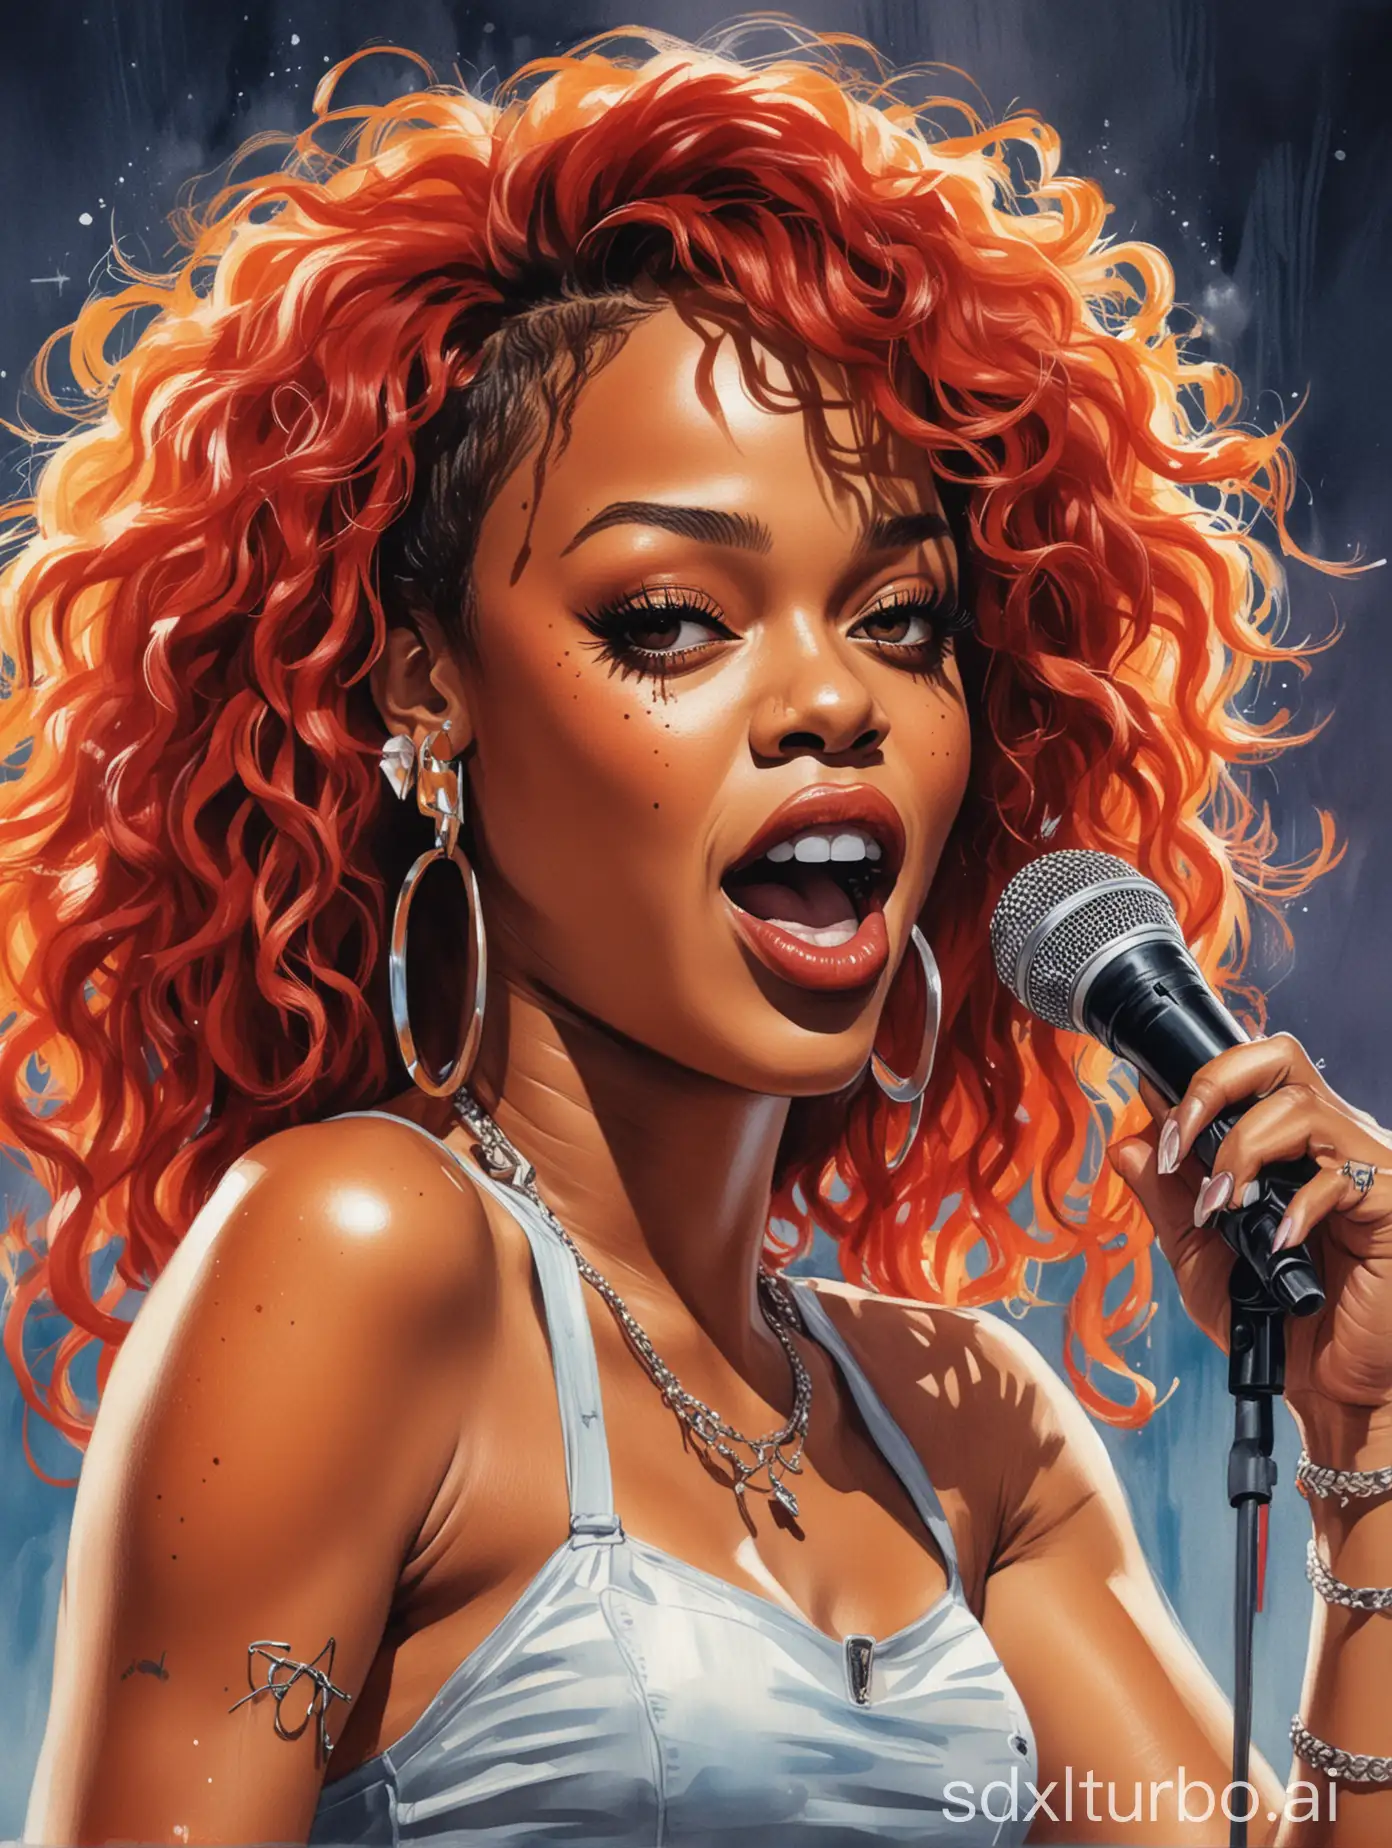 A colorful and whimsically drawn caricature of Rihanna performing on a mammoth stage, with exaggerated features and expressions that convey her energetic personality, capturing the essence of her electrifying live performances